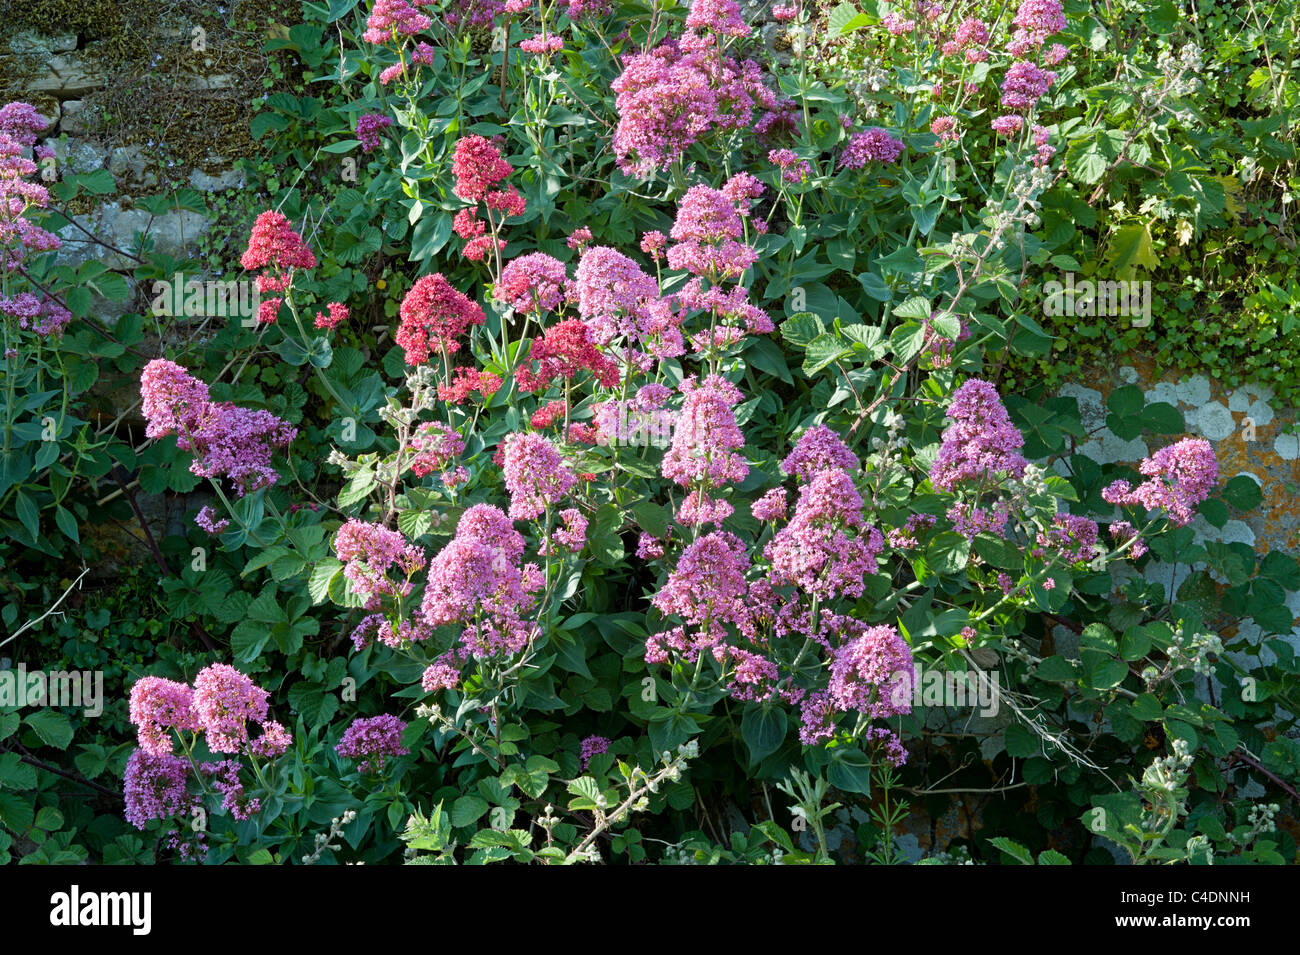 Red Valerian; Centranthus ruber, growing in stone wall, Sheepscombe, Gloucestershire, England UK, Great Britain Stock Photo